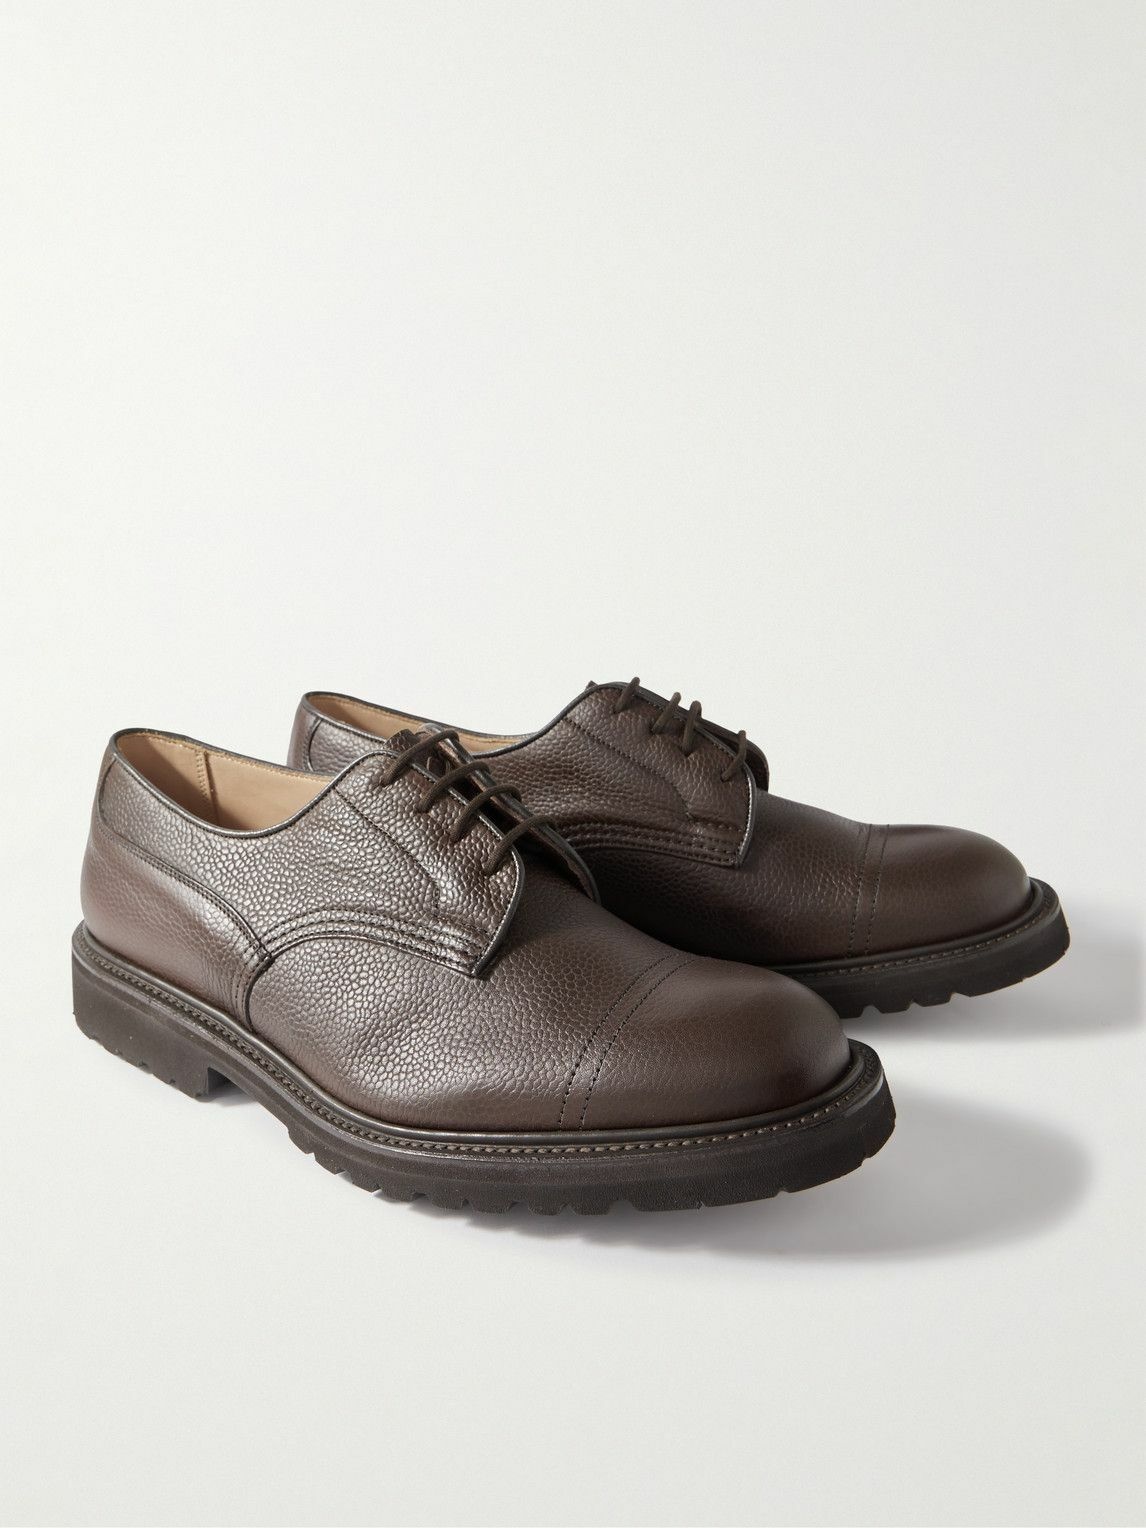 Tricker's - Matlock Full-Grain Leather Derby Shoes - Brown